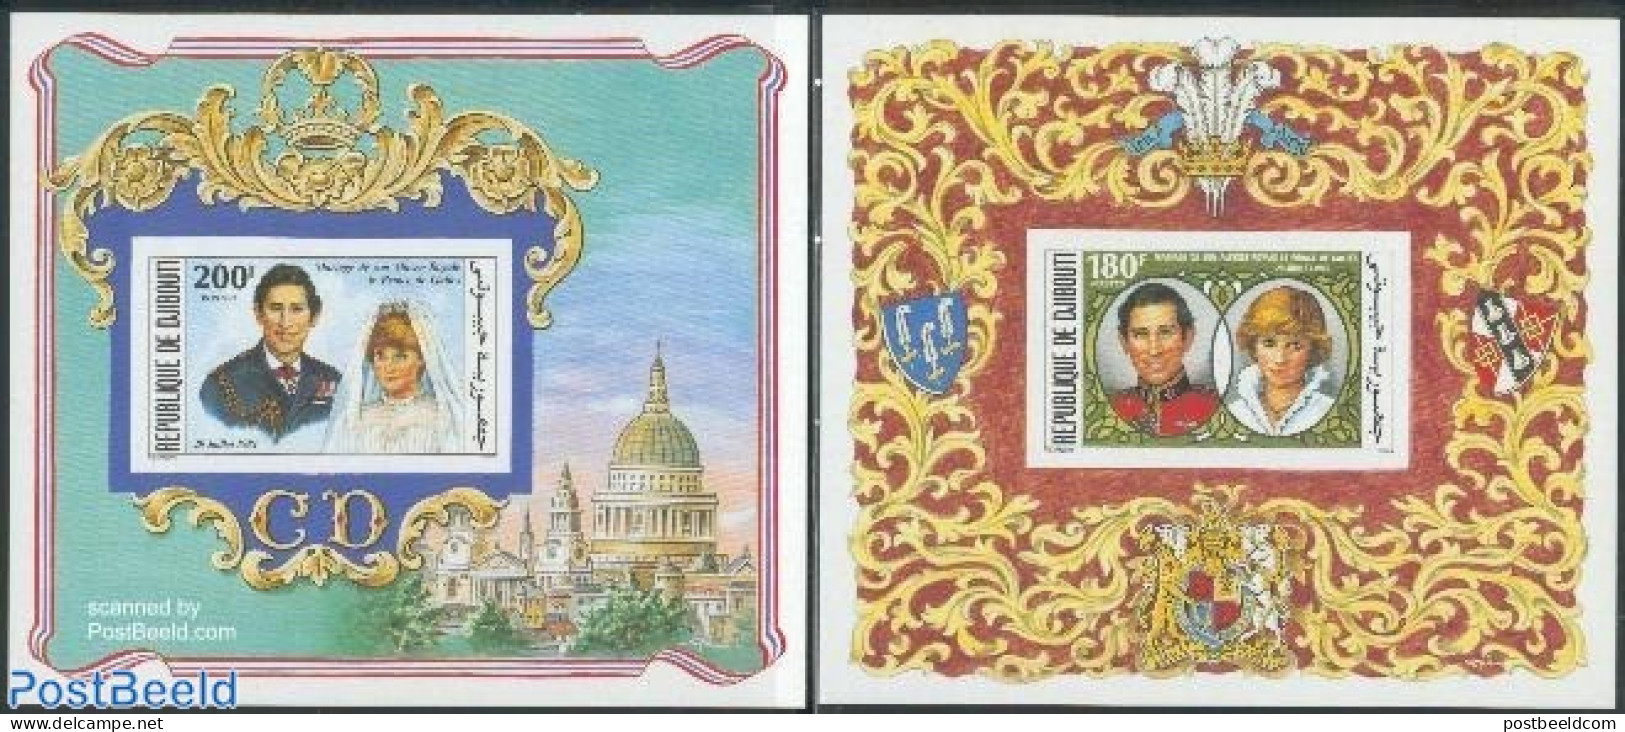 Djibouti 1981 Charles & Diana Wedding 2 S/s Imperforated, Mint NH, History - Charles & Diana - Kings & Queens (Royalty) - Familias Reales